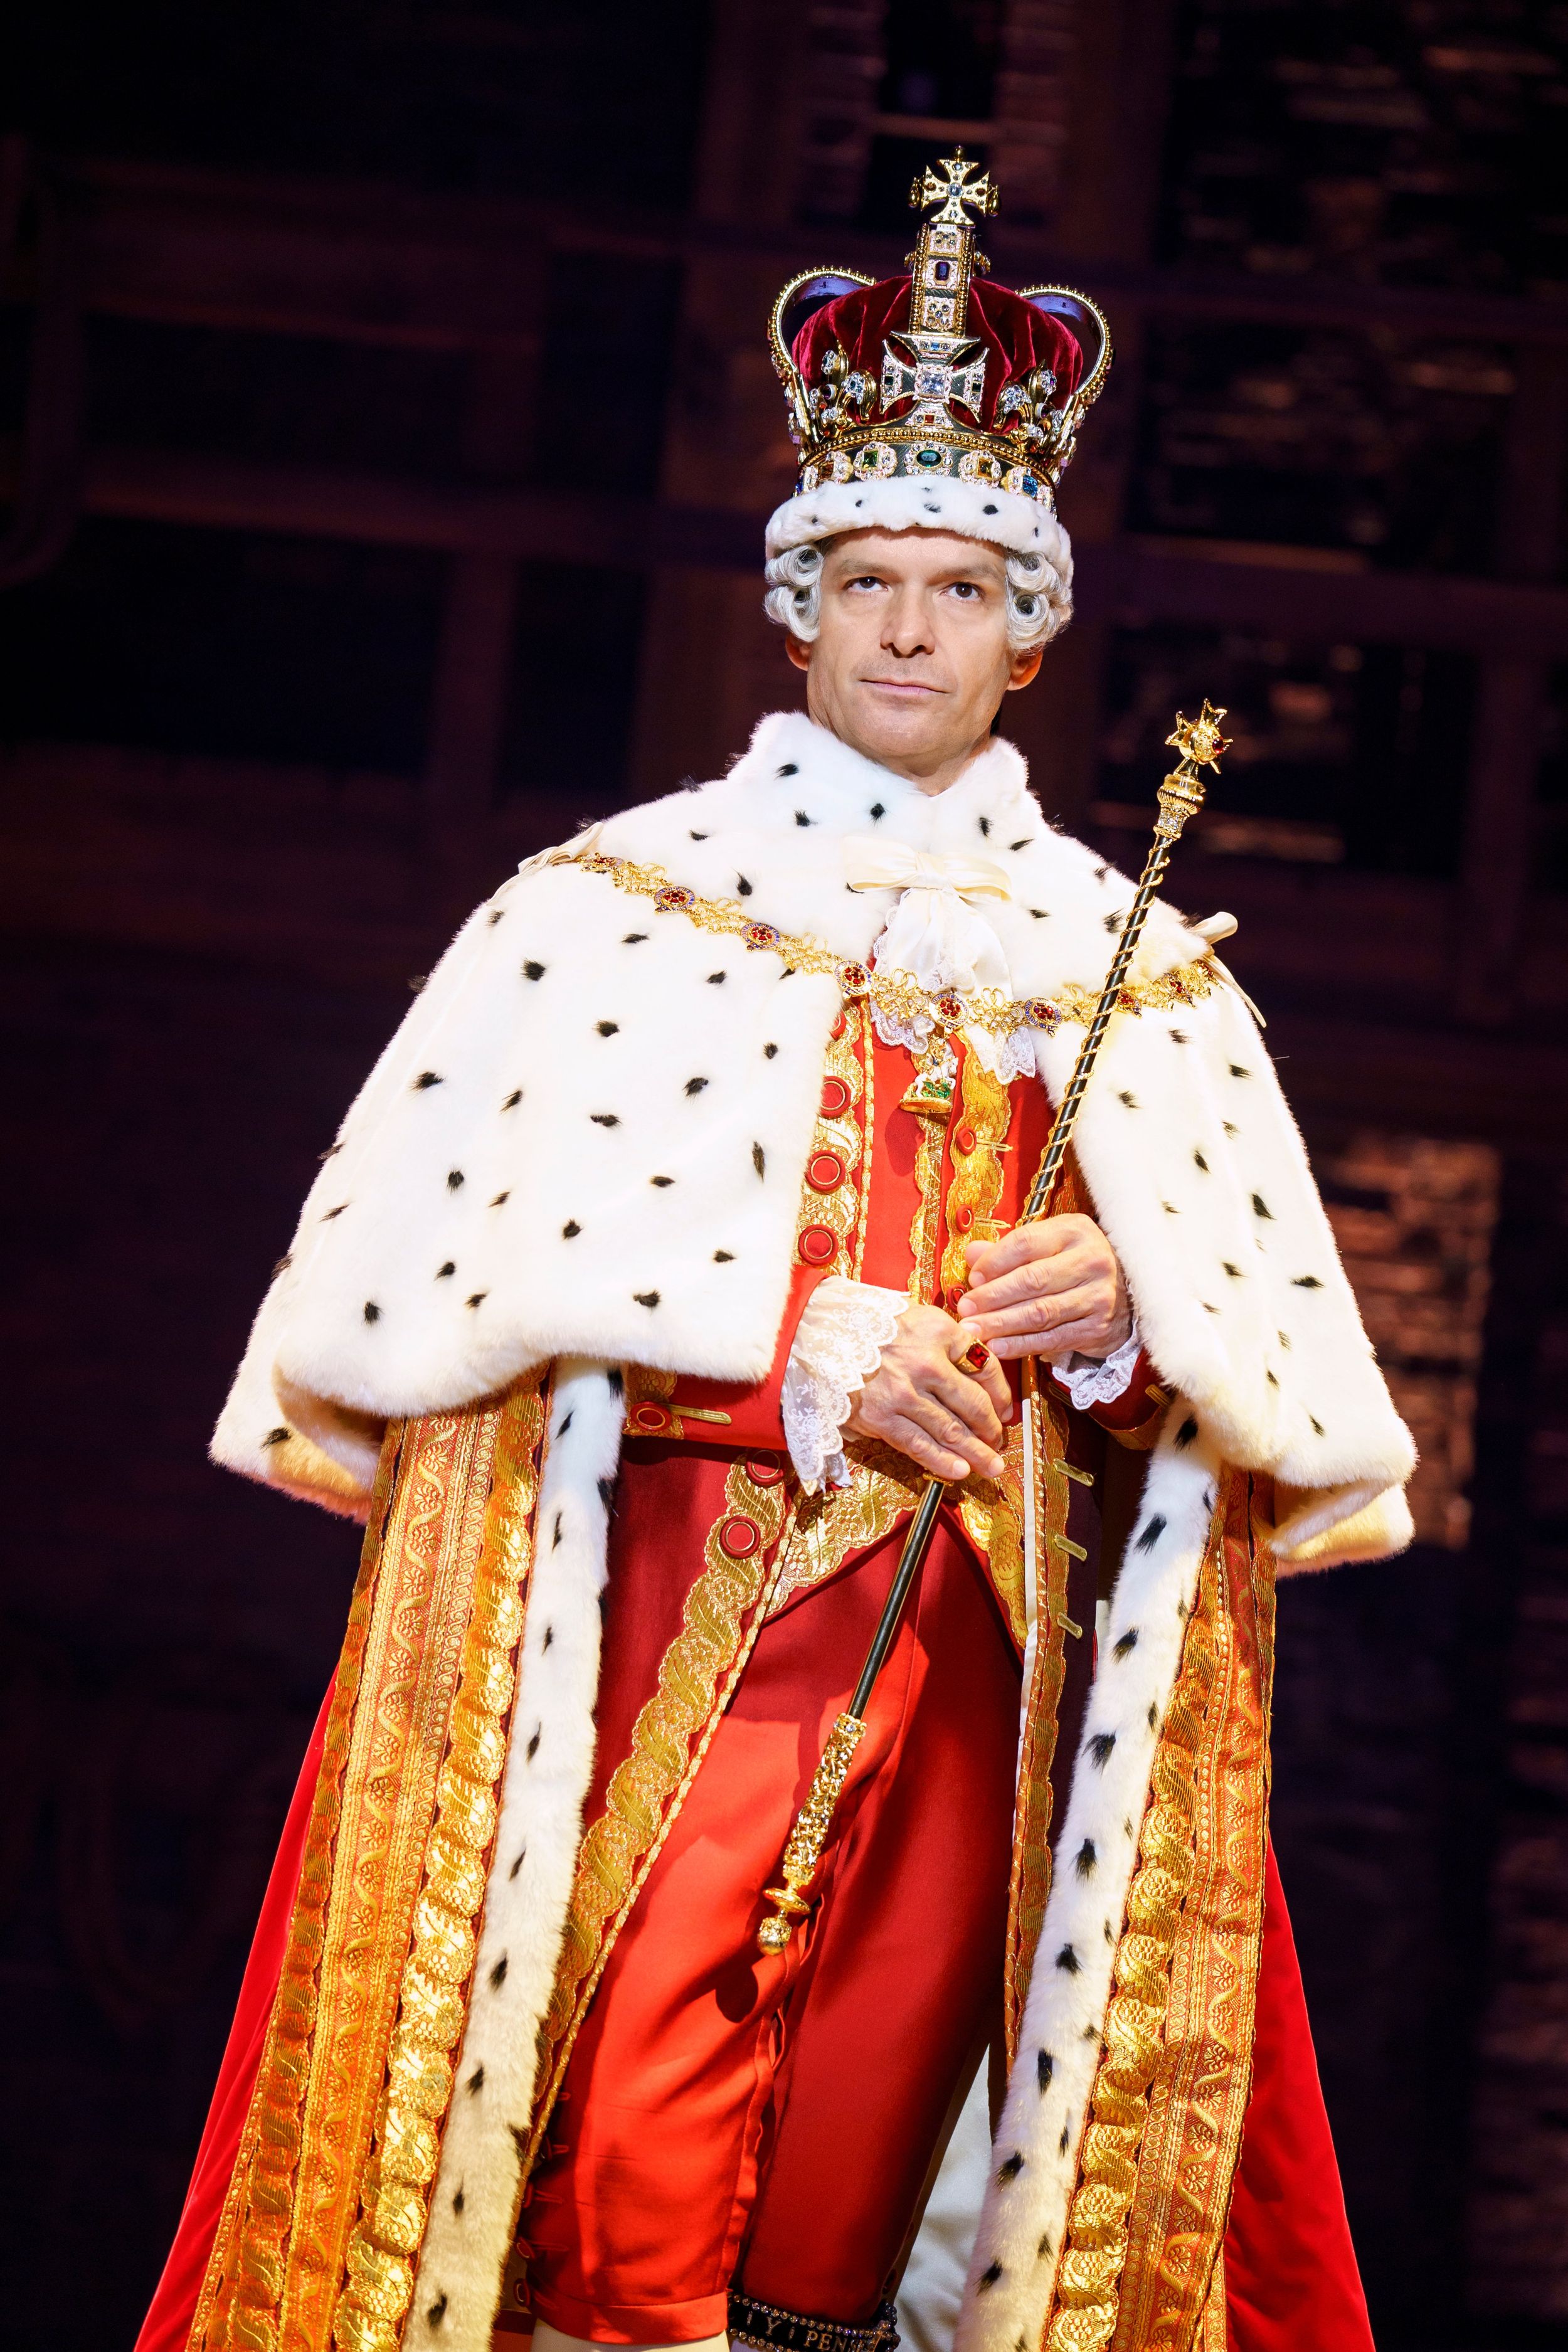 You'll be back': In playing King George III in 'Hamilton,' Rick